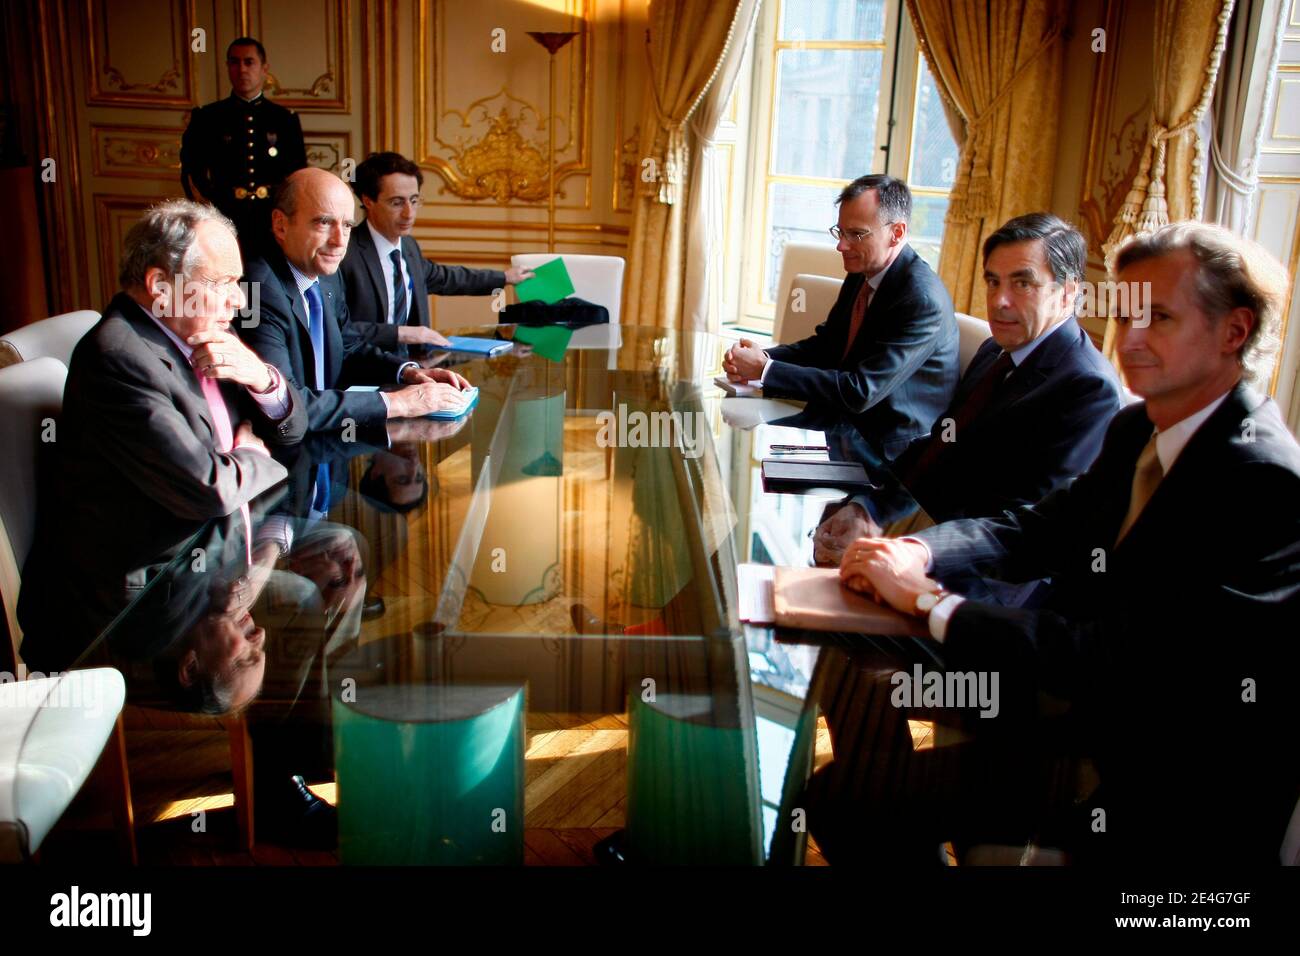 French Prime minister Francois Fillon, flanked by his cabinet director Jean-Paul  Faugere (2ndR) and his assistant Principal private secretary Antoine Gosset-Grainville  (1ndR) has a meeting with Former French Prime ministers Michel Rocard